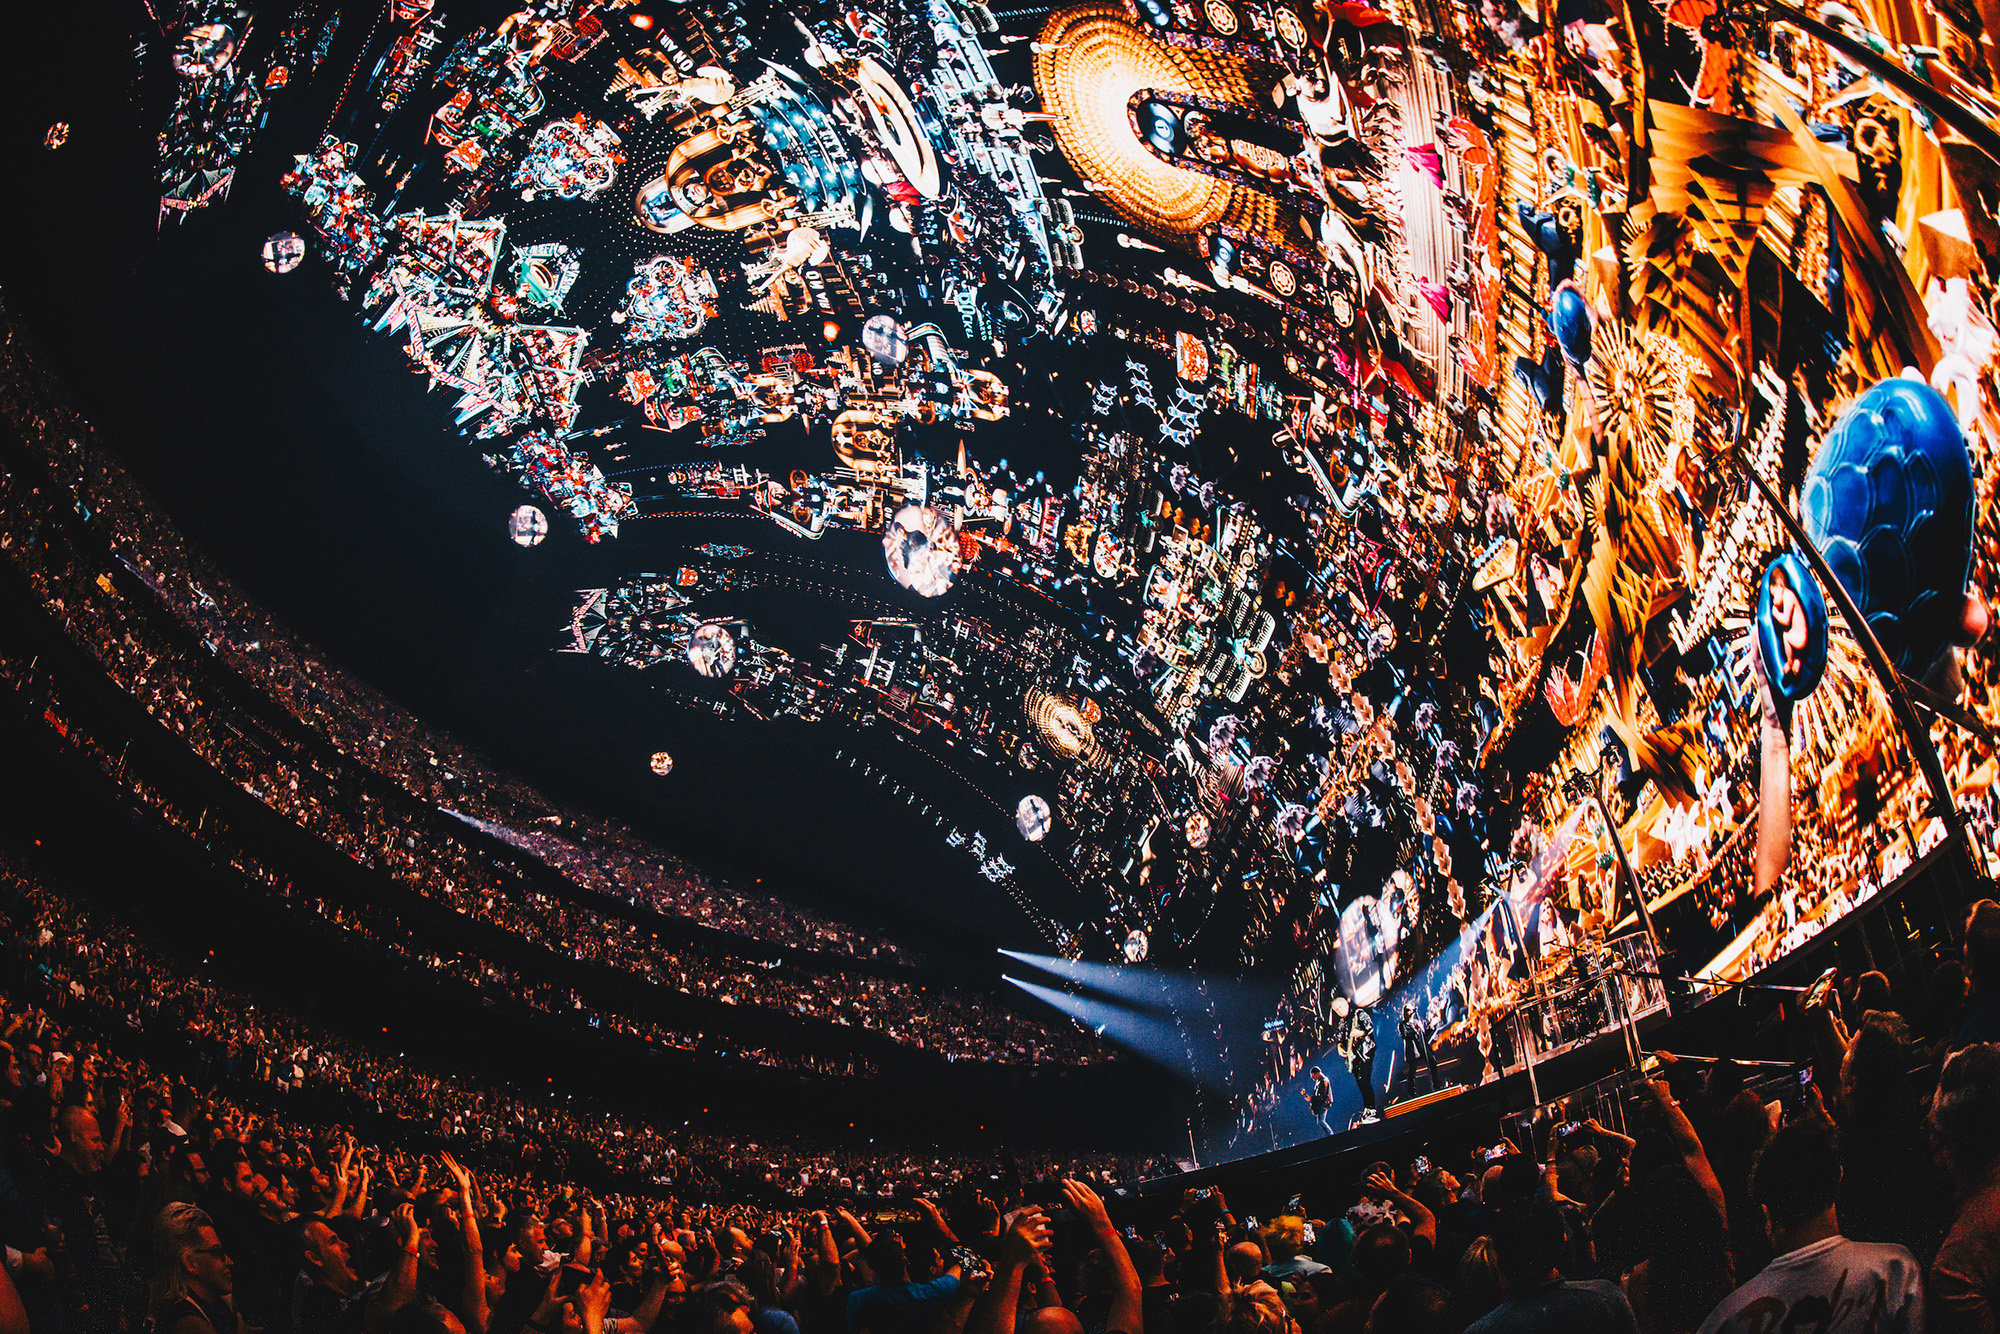 A wide-angle image inside the Sphere in Las Vegas showing how the visualization crawls up the sides and top of the venue.